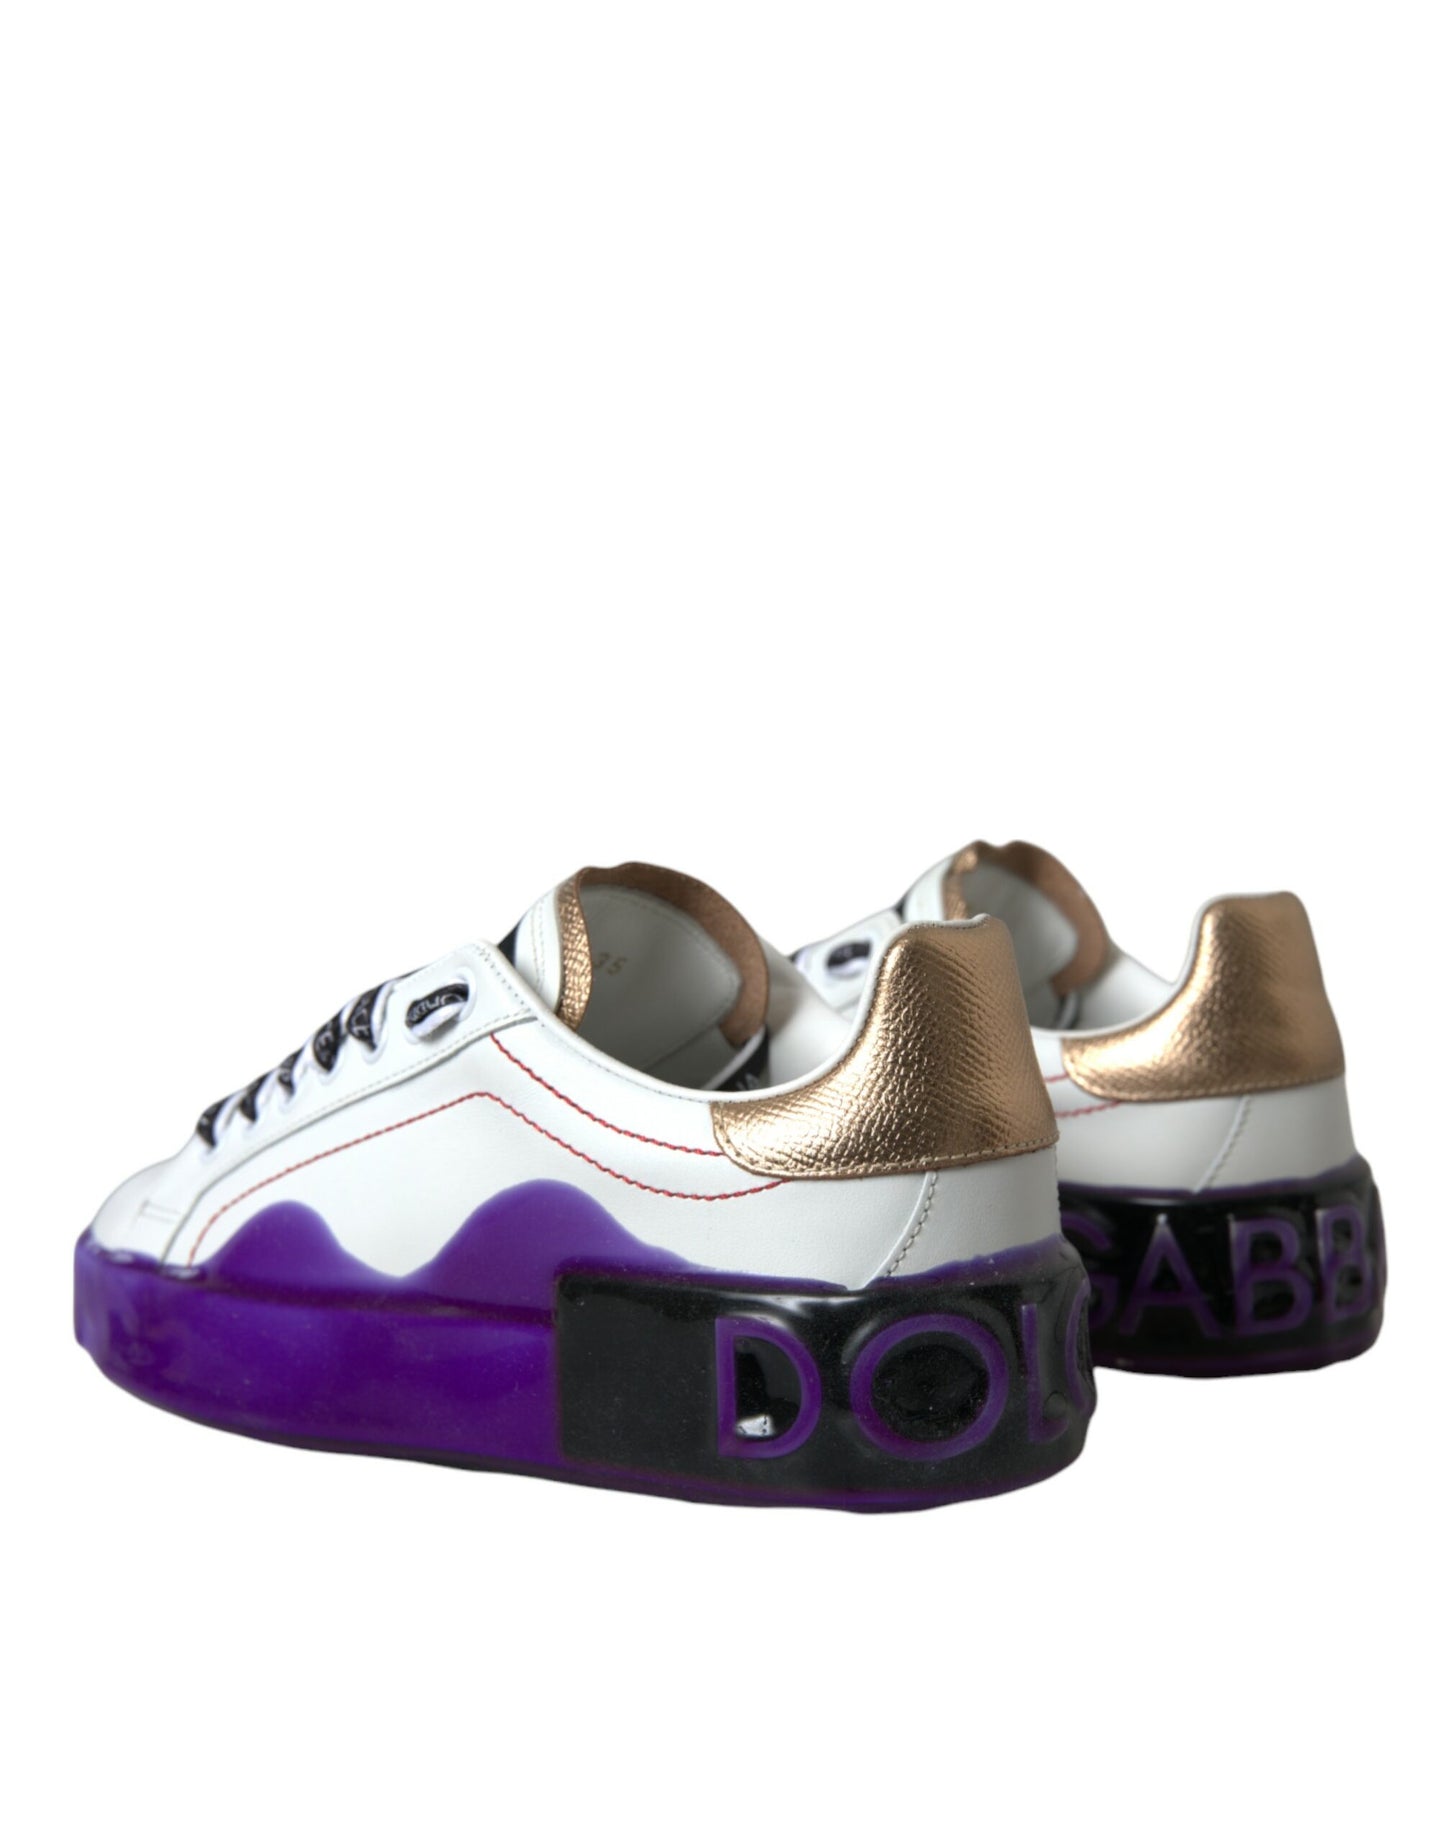 Dolce & Gabbana White Leather Portofino Low Top Sneakers Shoes